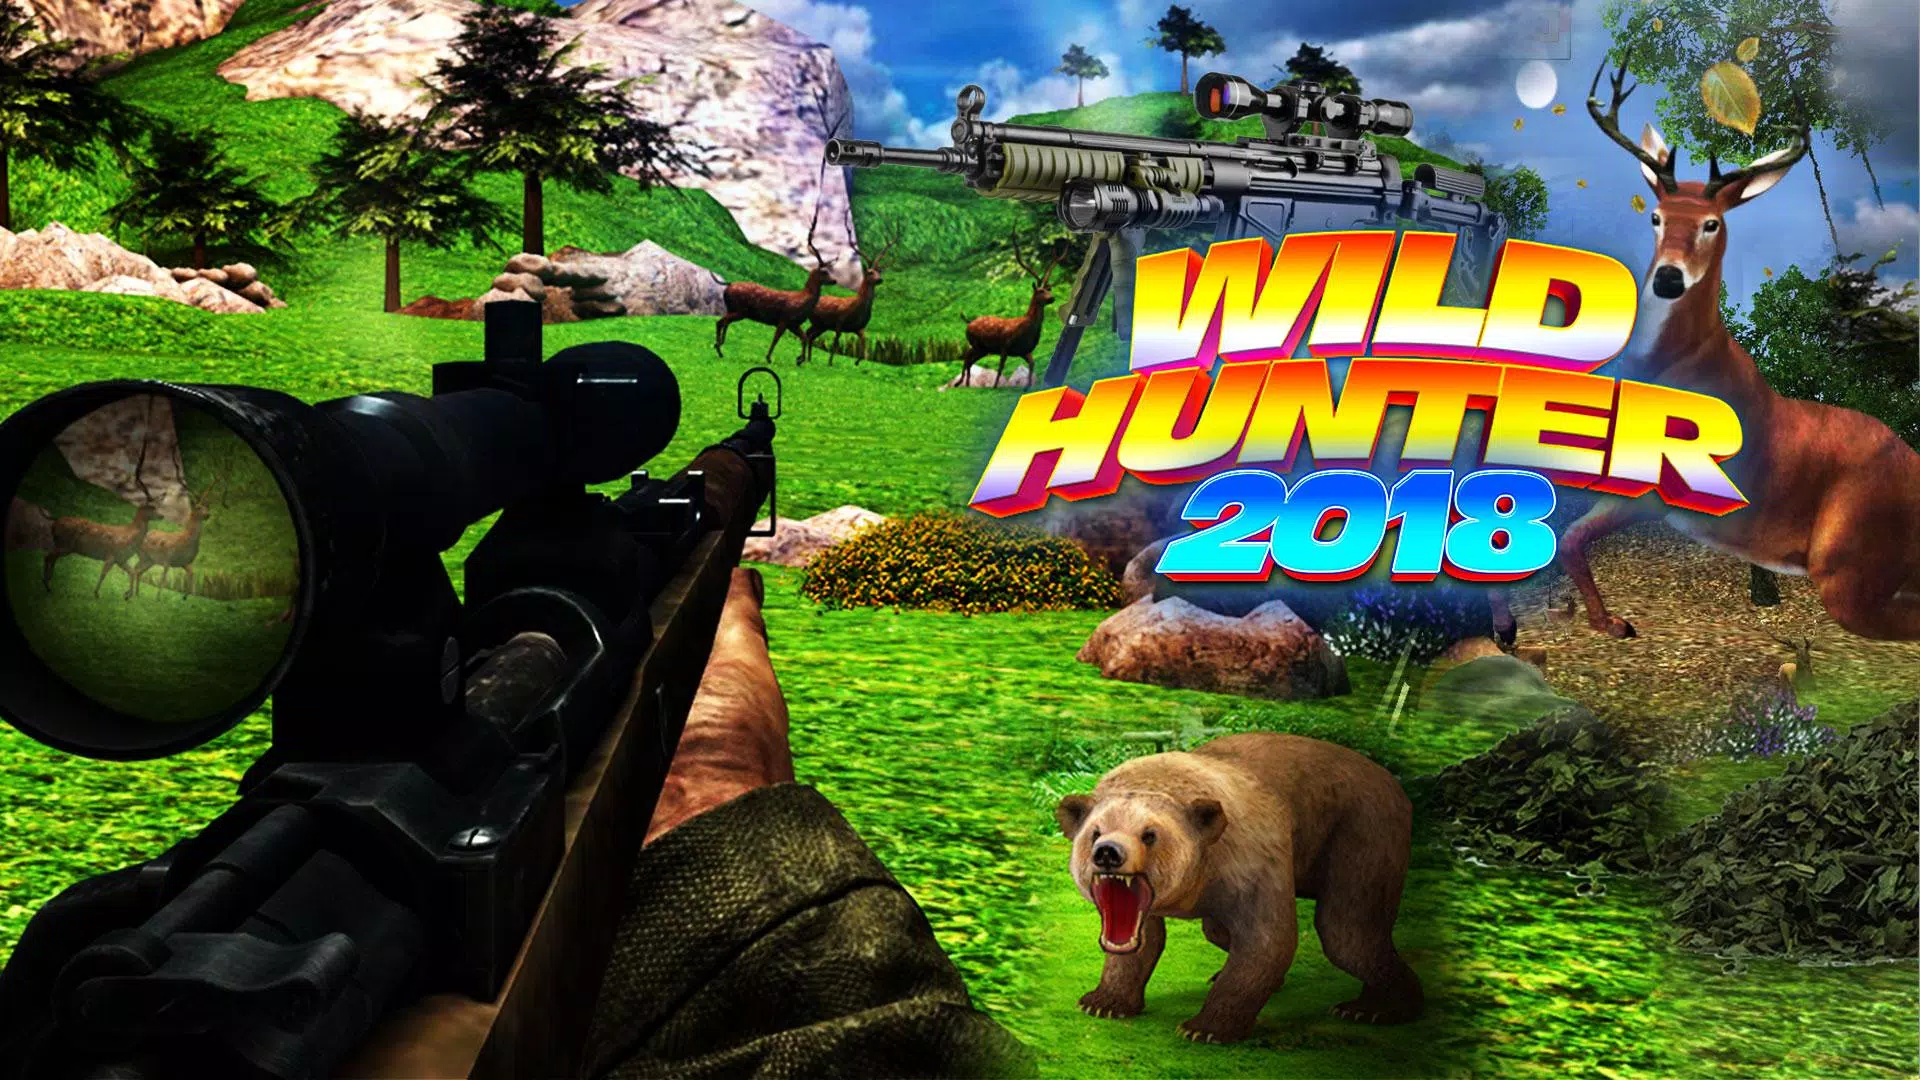 Sniper Animal 3D Hunting: Wild Hunter 2018 APK for Android Download